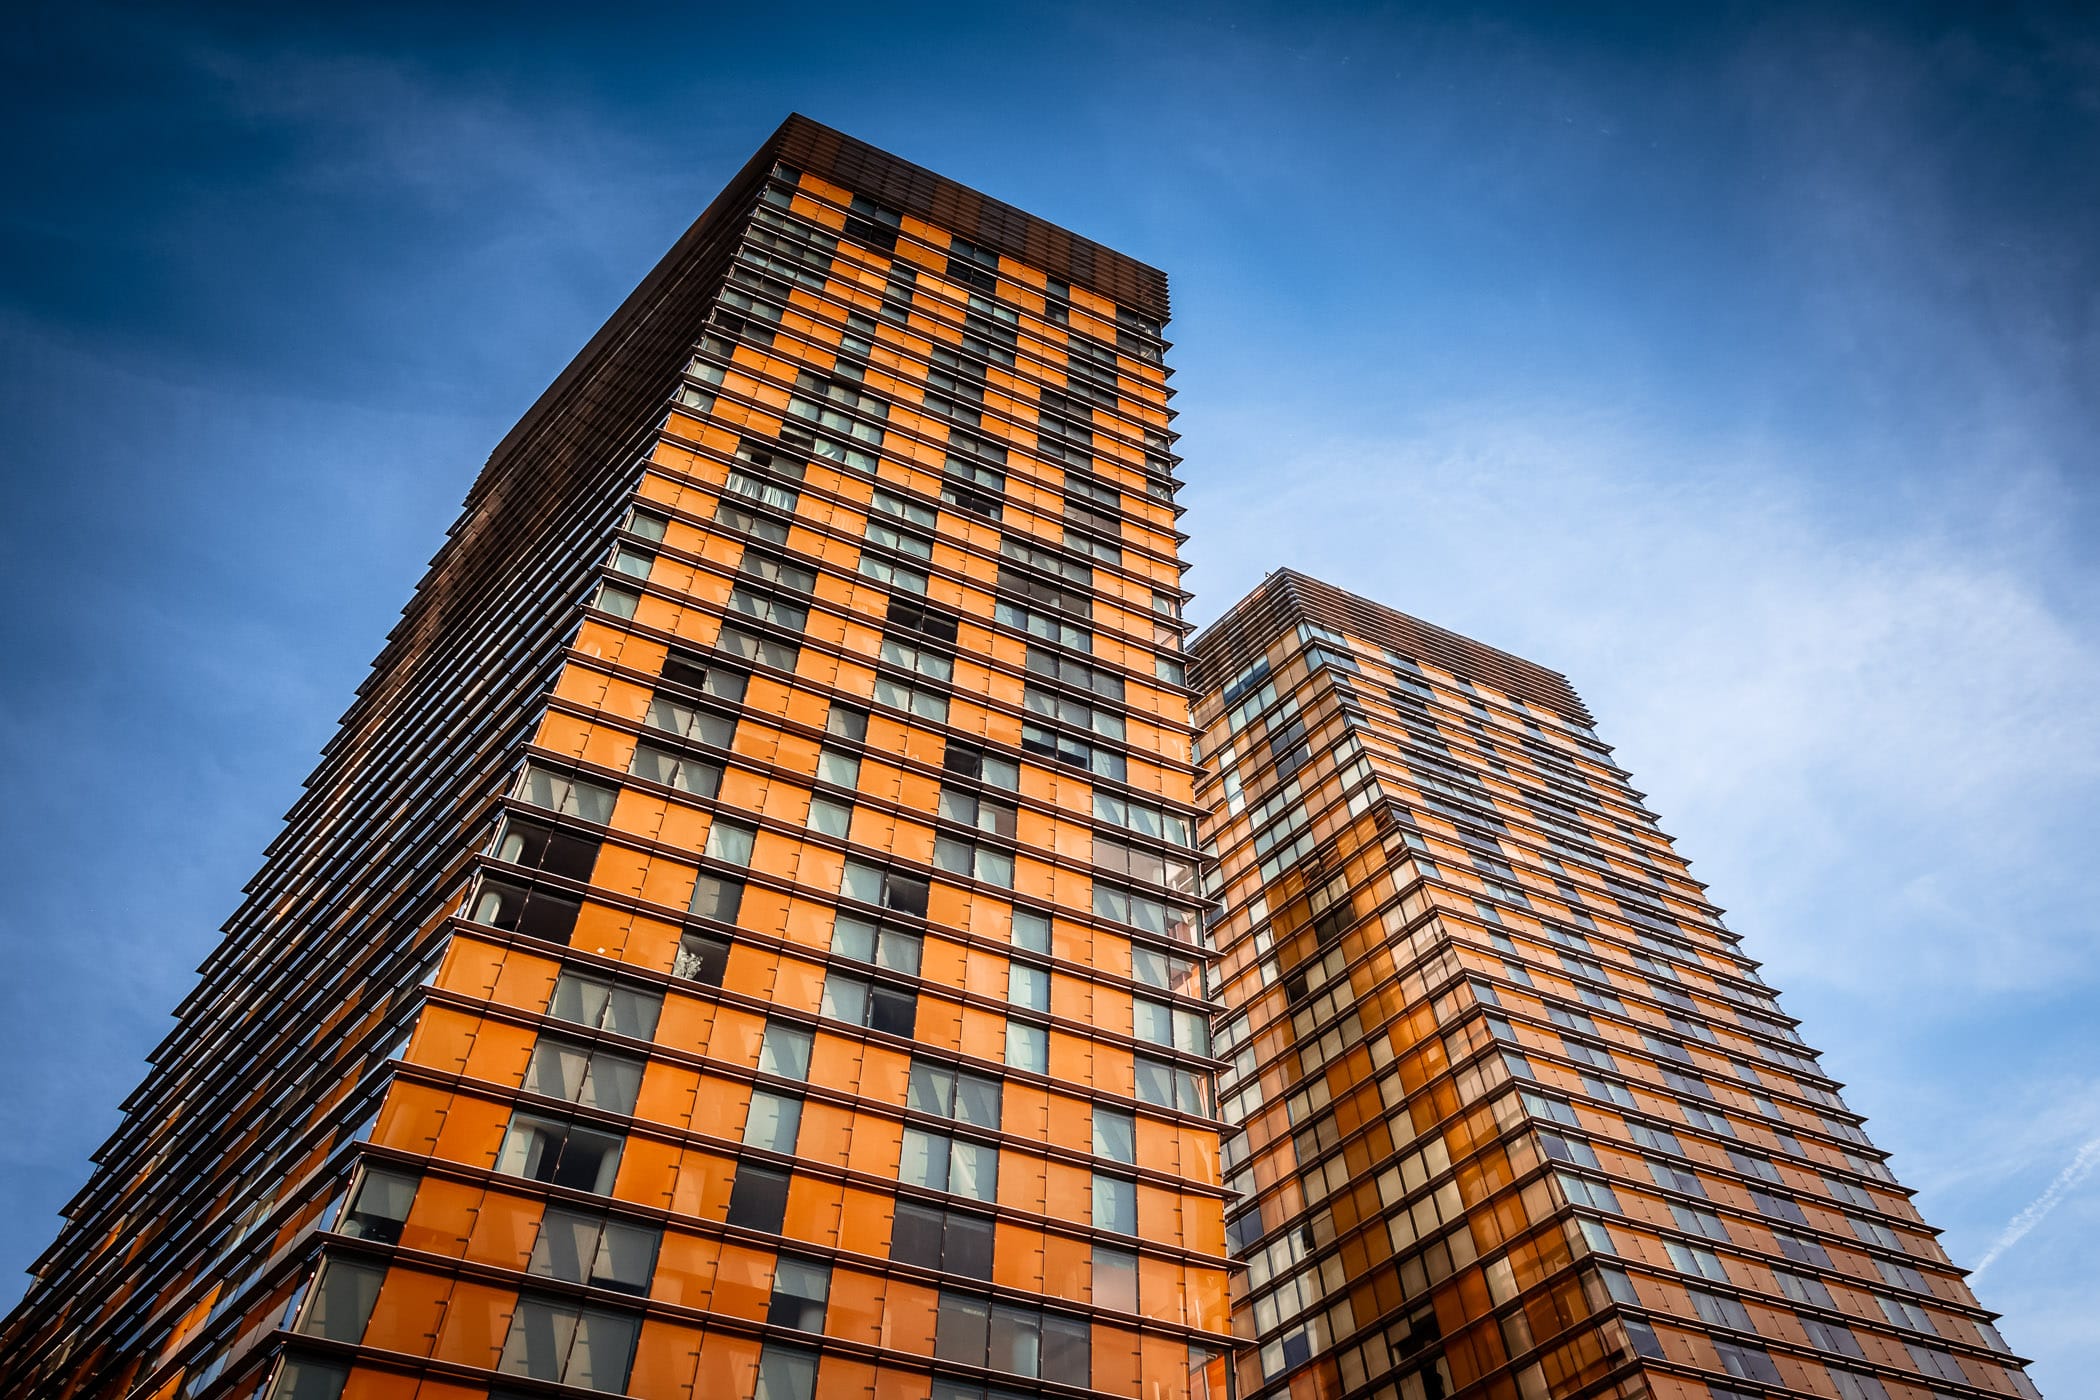 The Veer Towers rise into the blue Nevada sky at CityCenter, Las Vegas.